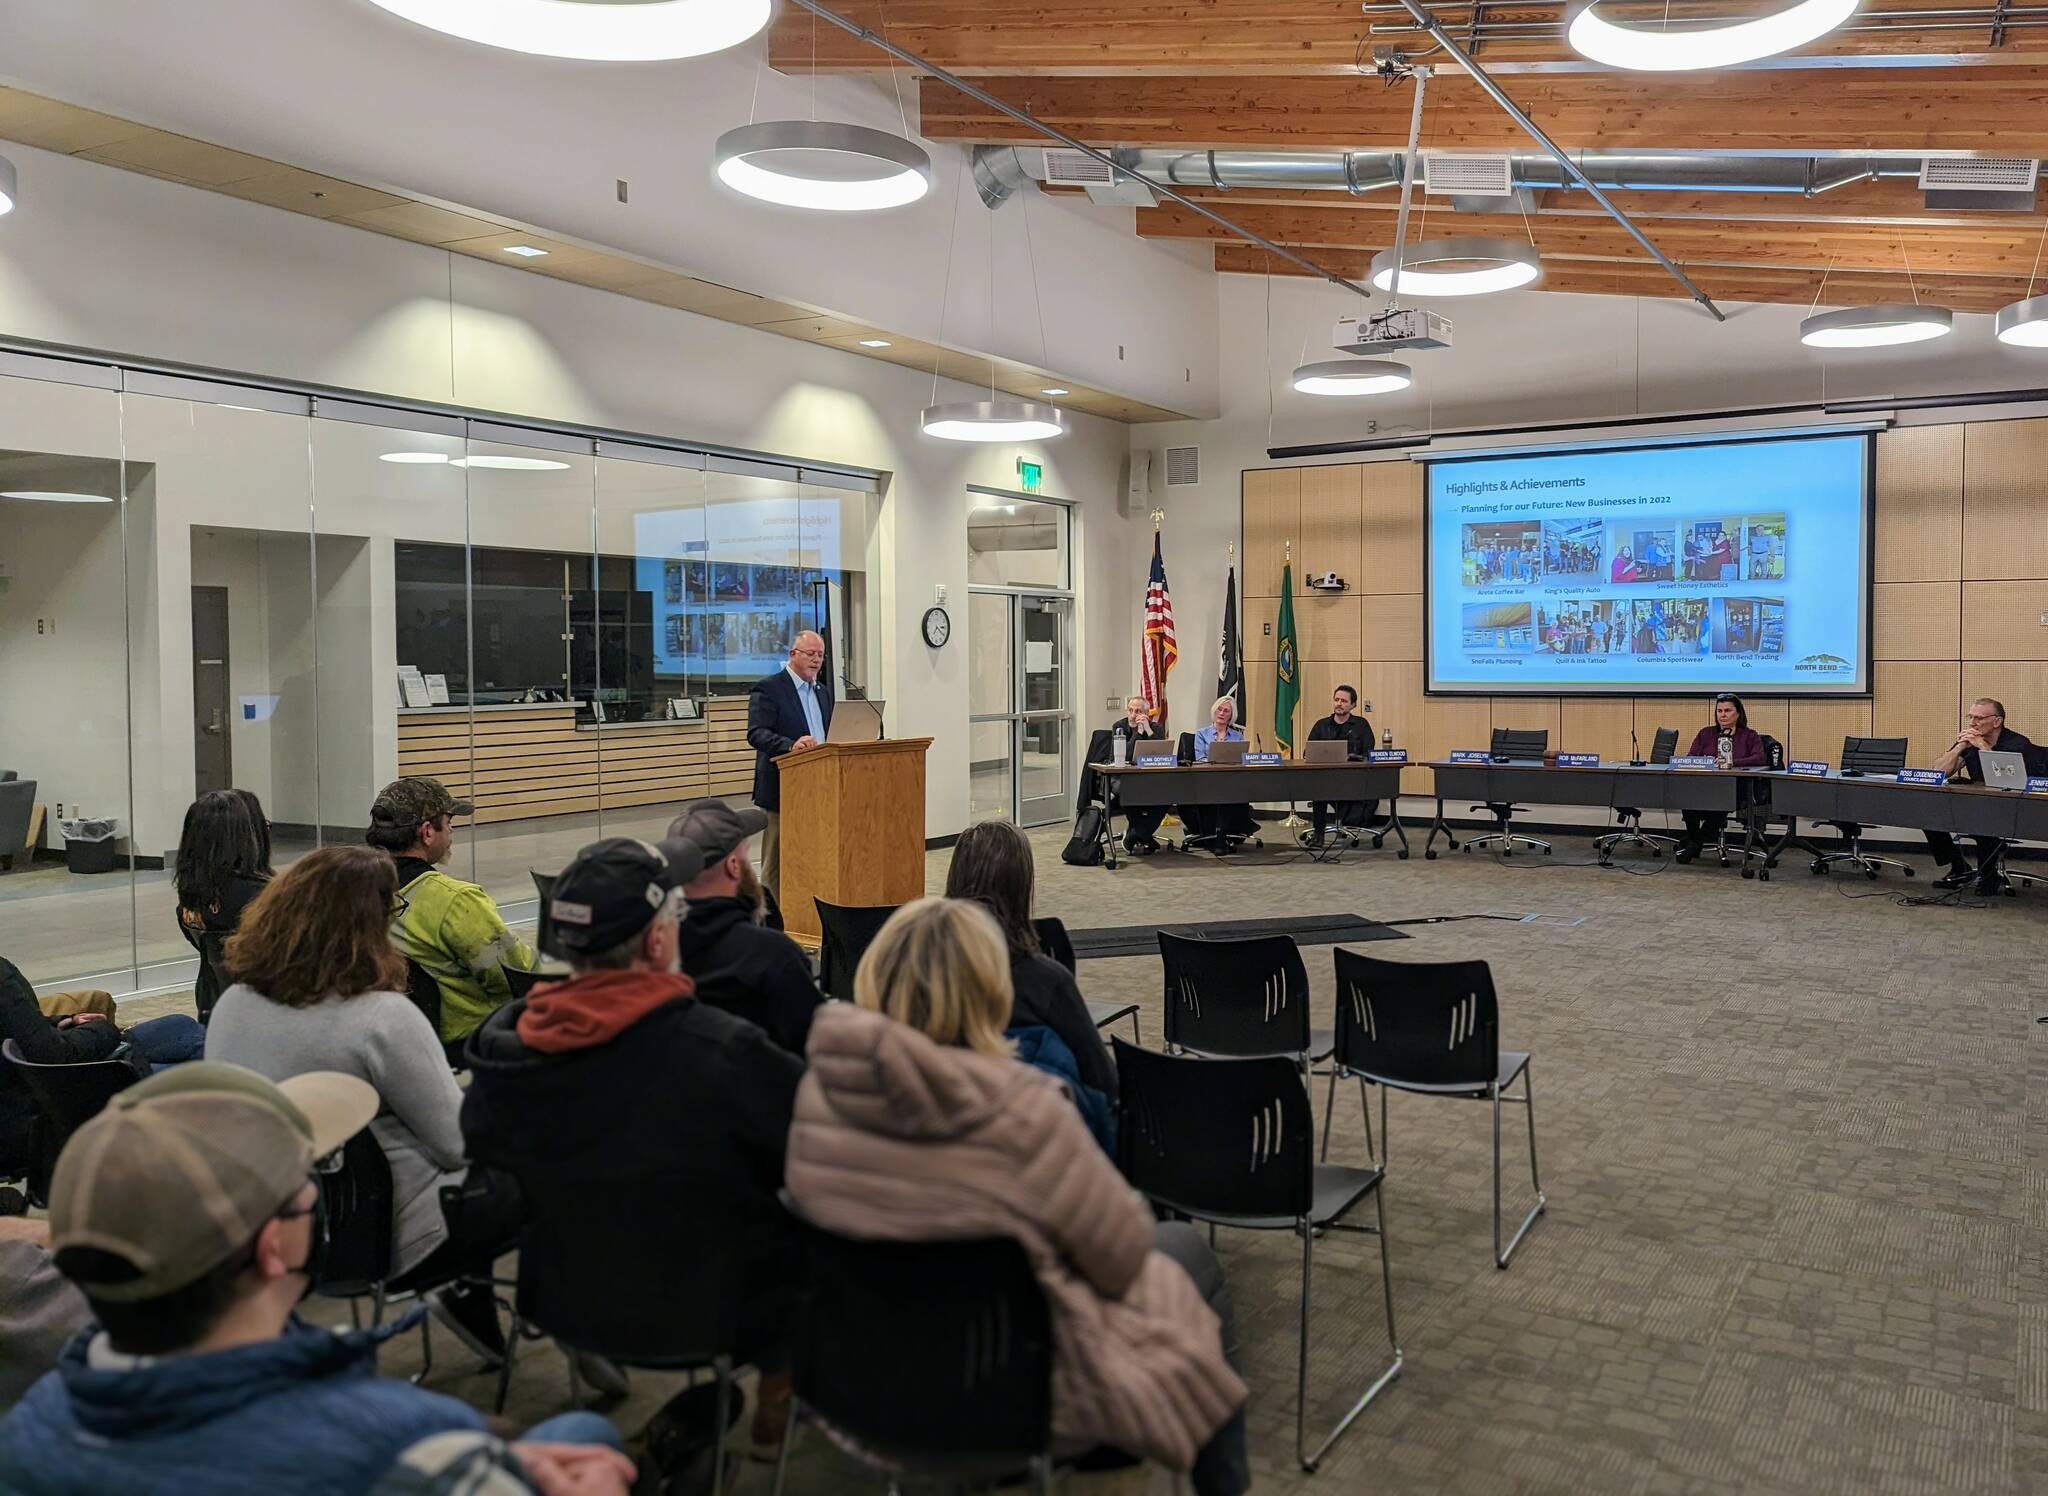 The State of the City address on March 7. Photo courtesy of the City of North Bend.